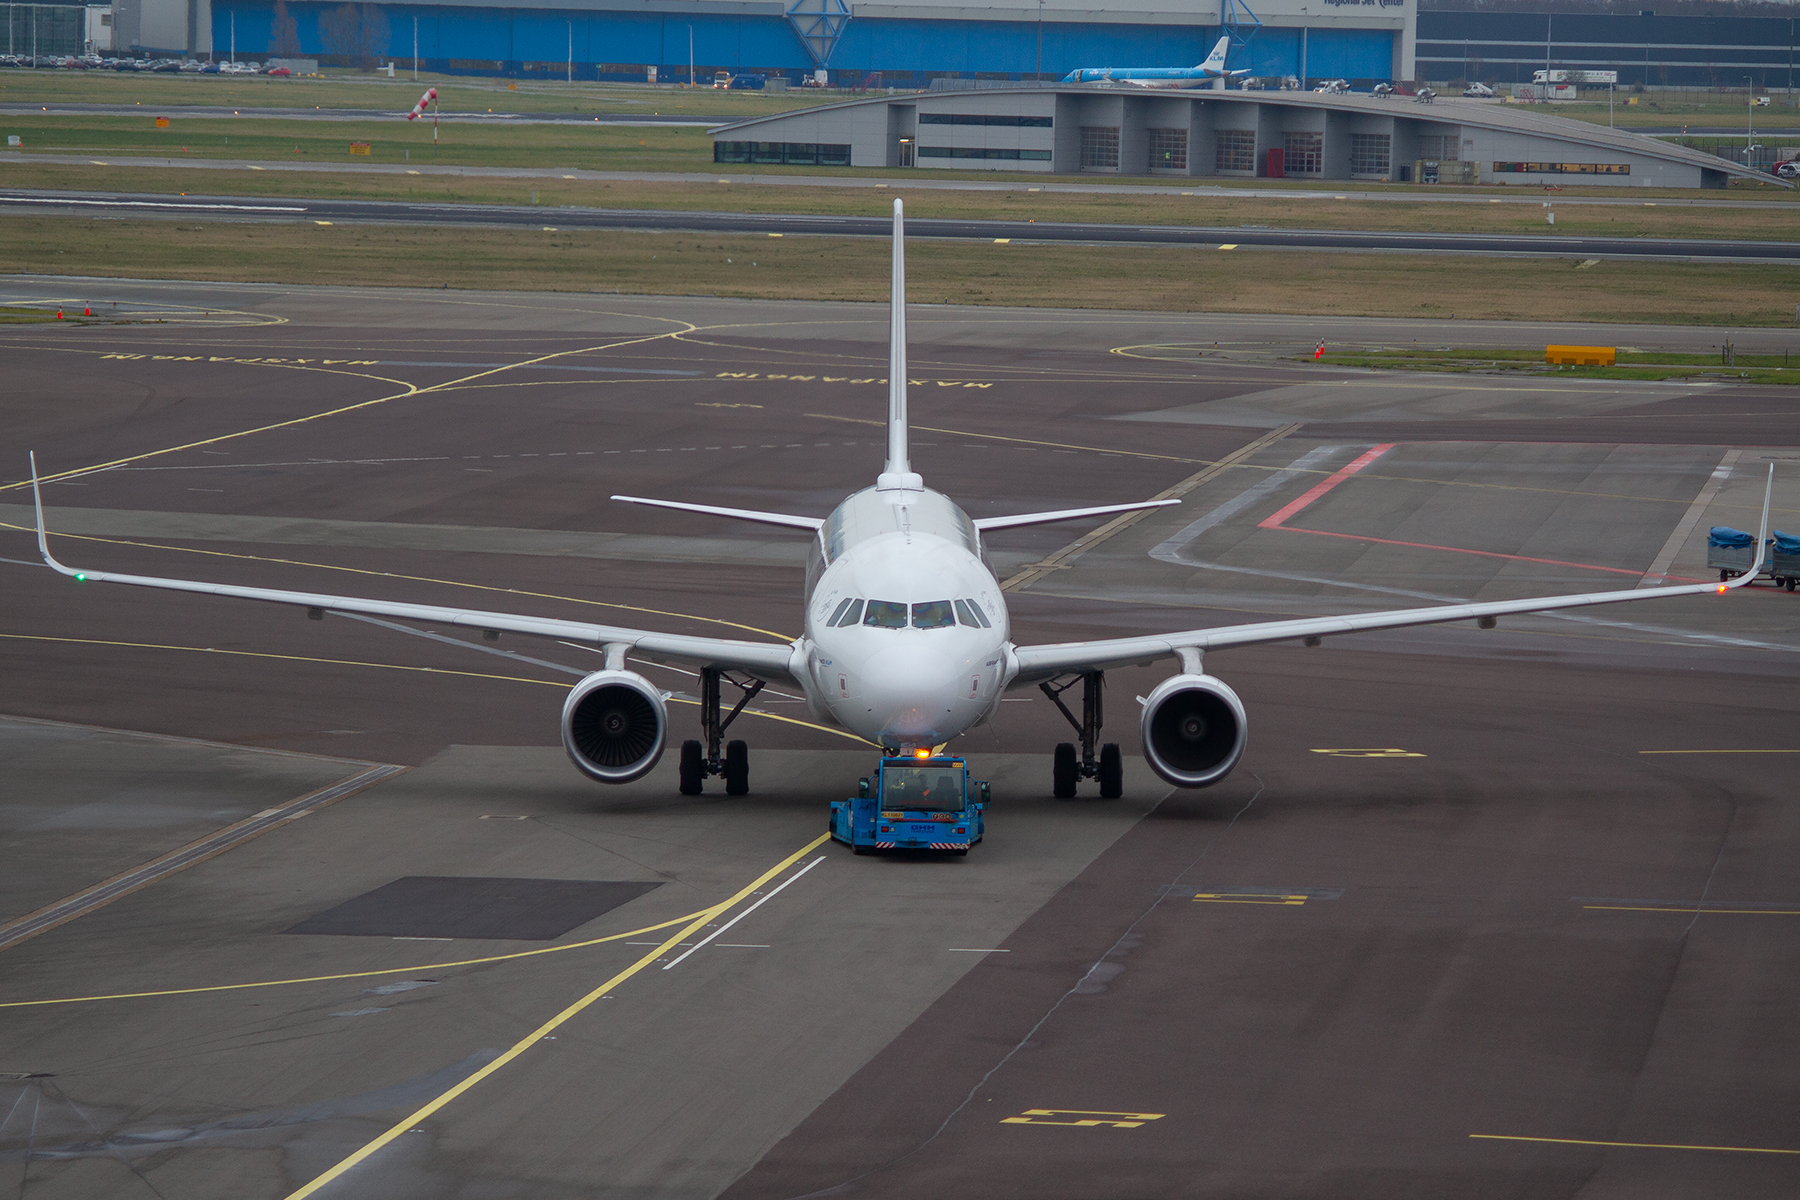 Air France Airbus A320-200 F-HEPJ at Schiphol